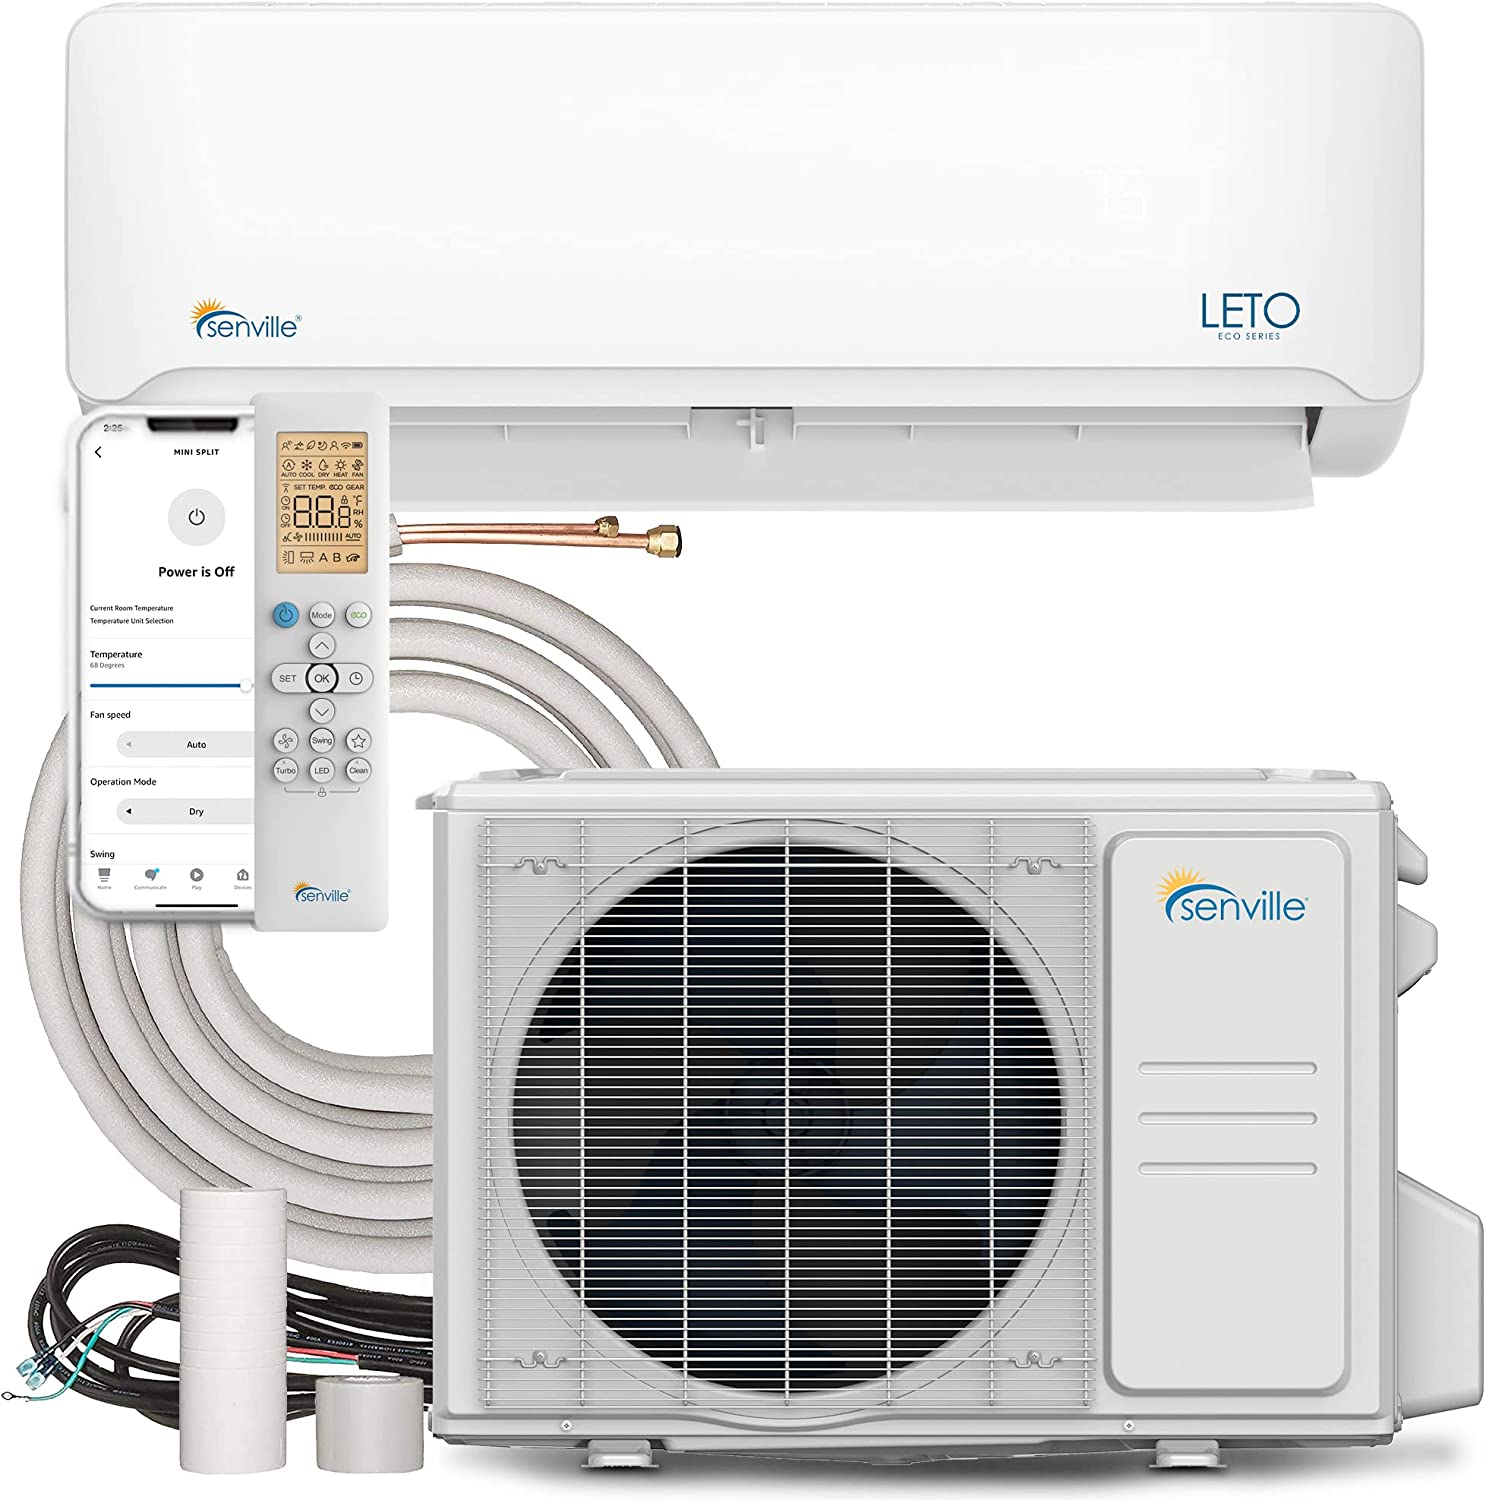 mini-split heat pump product available for purchase